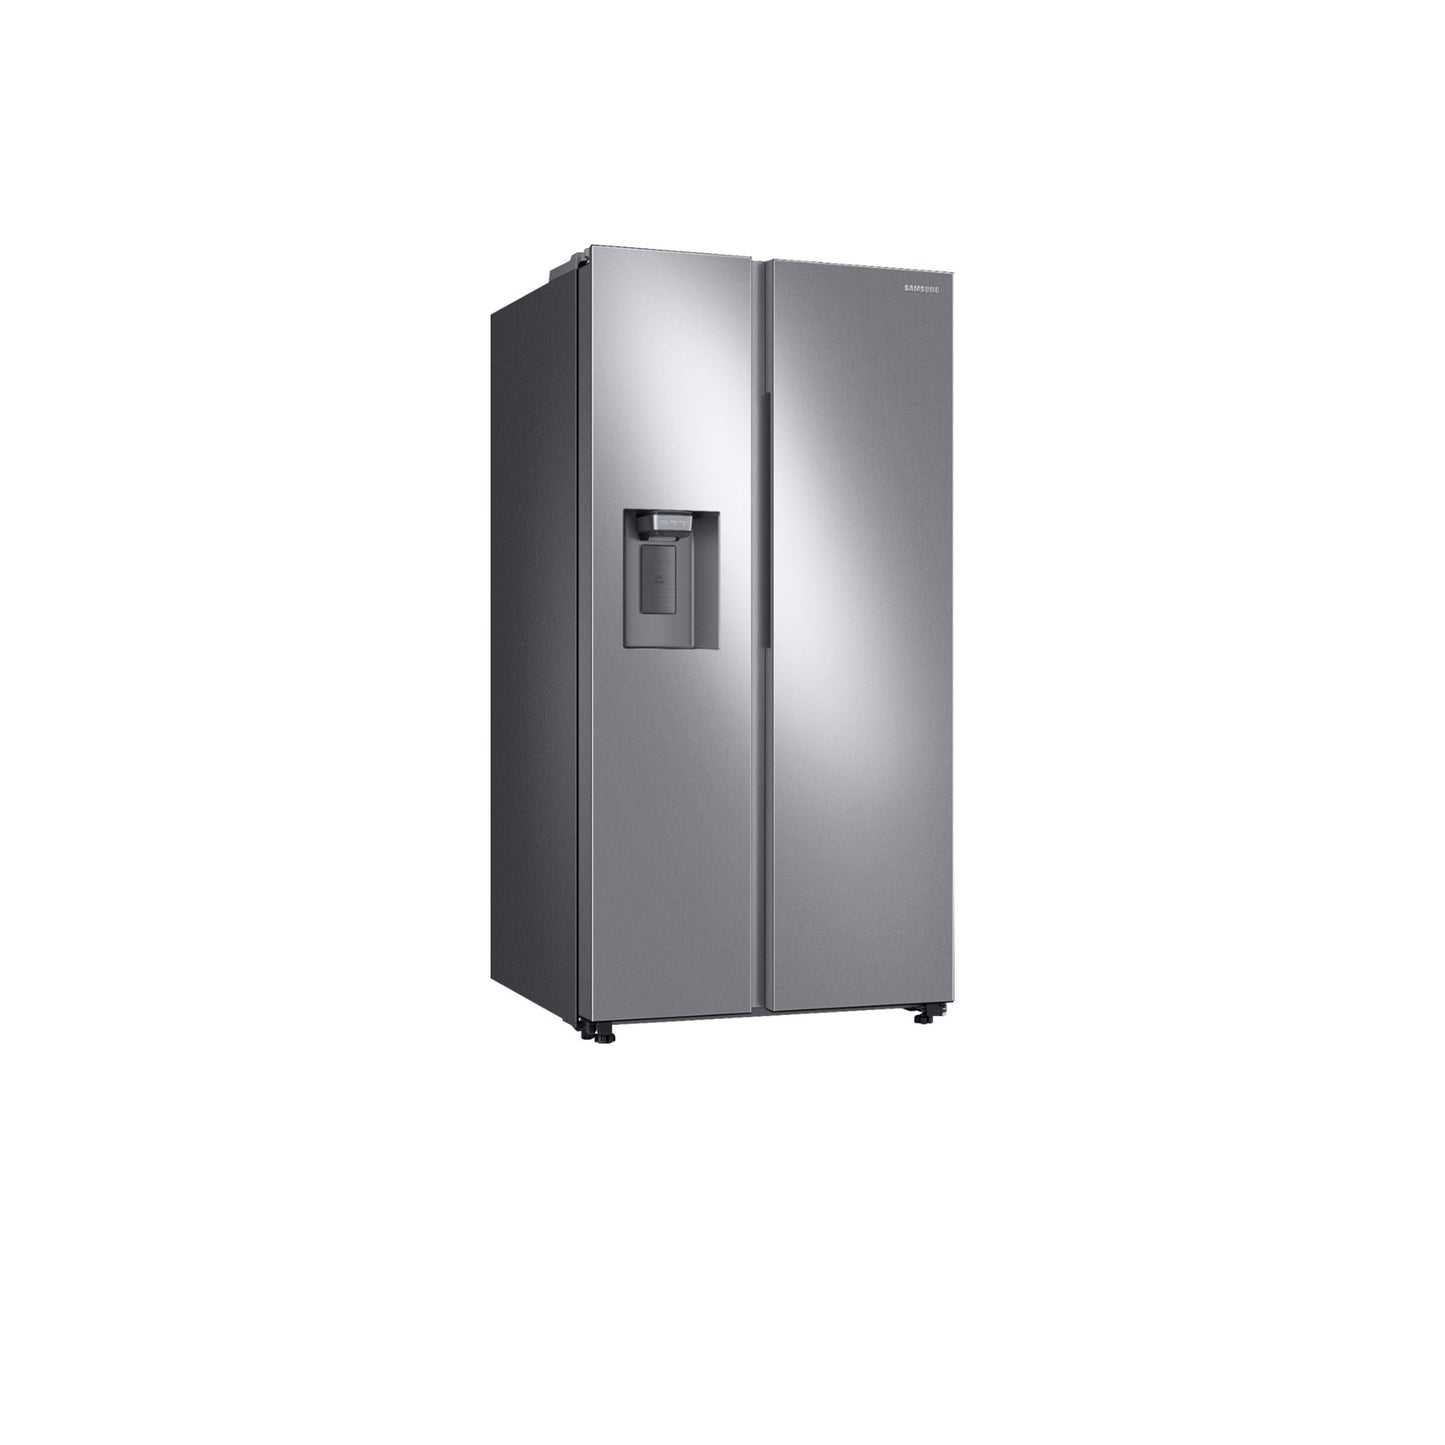 27.4 cu. ft. Large Capacity Side-by-Side Refrigerator in Stainless Steel.